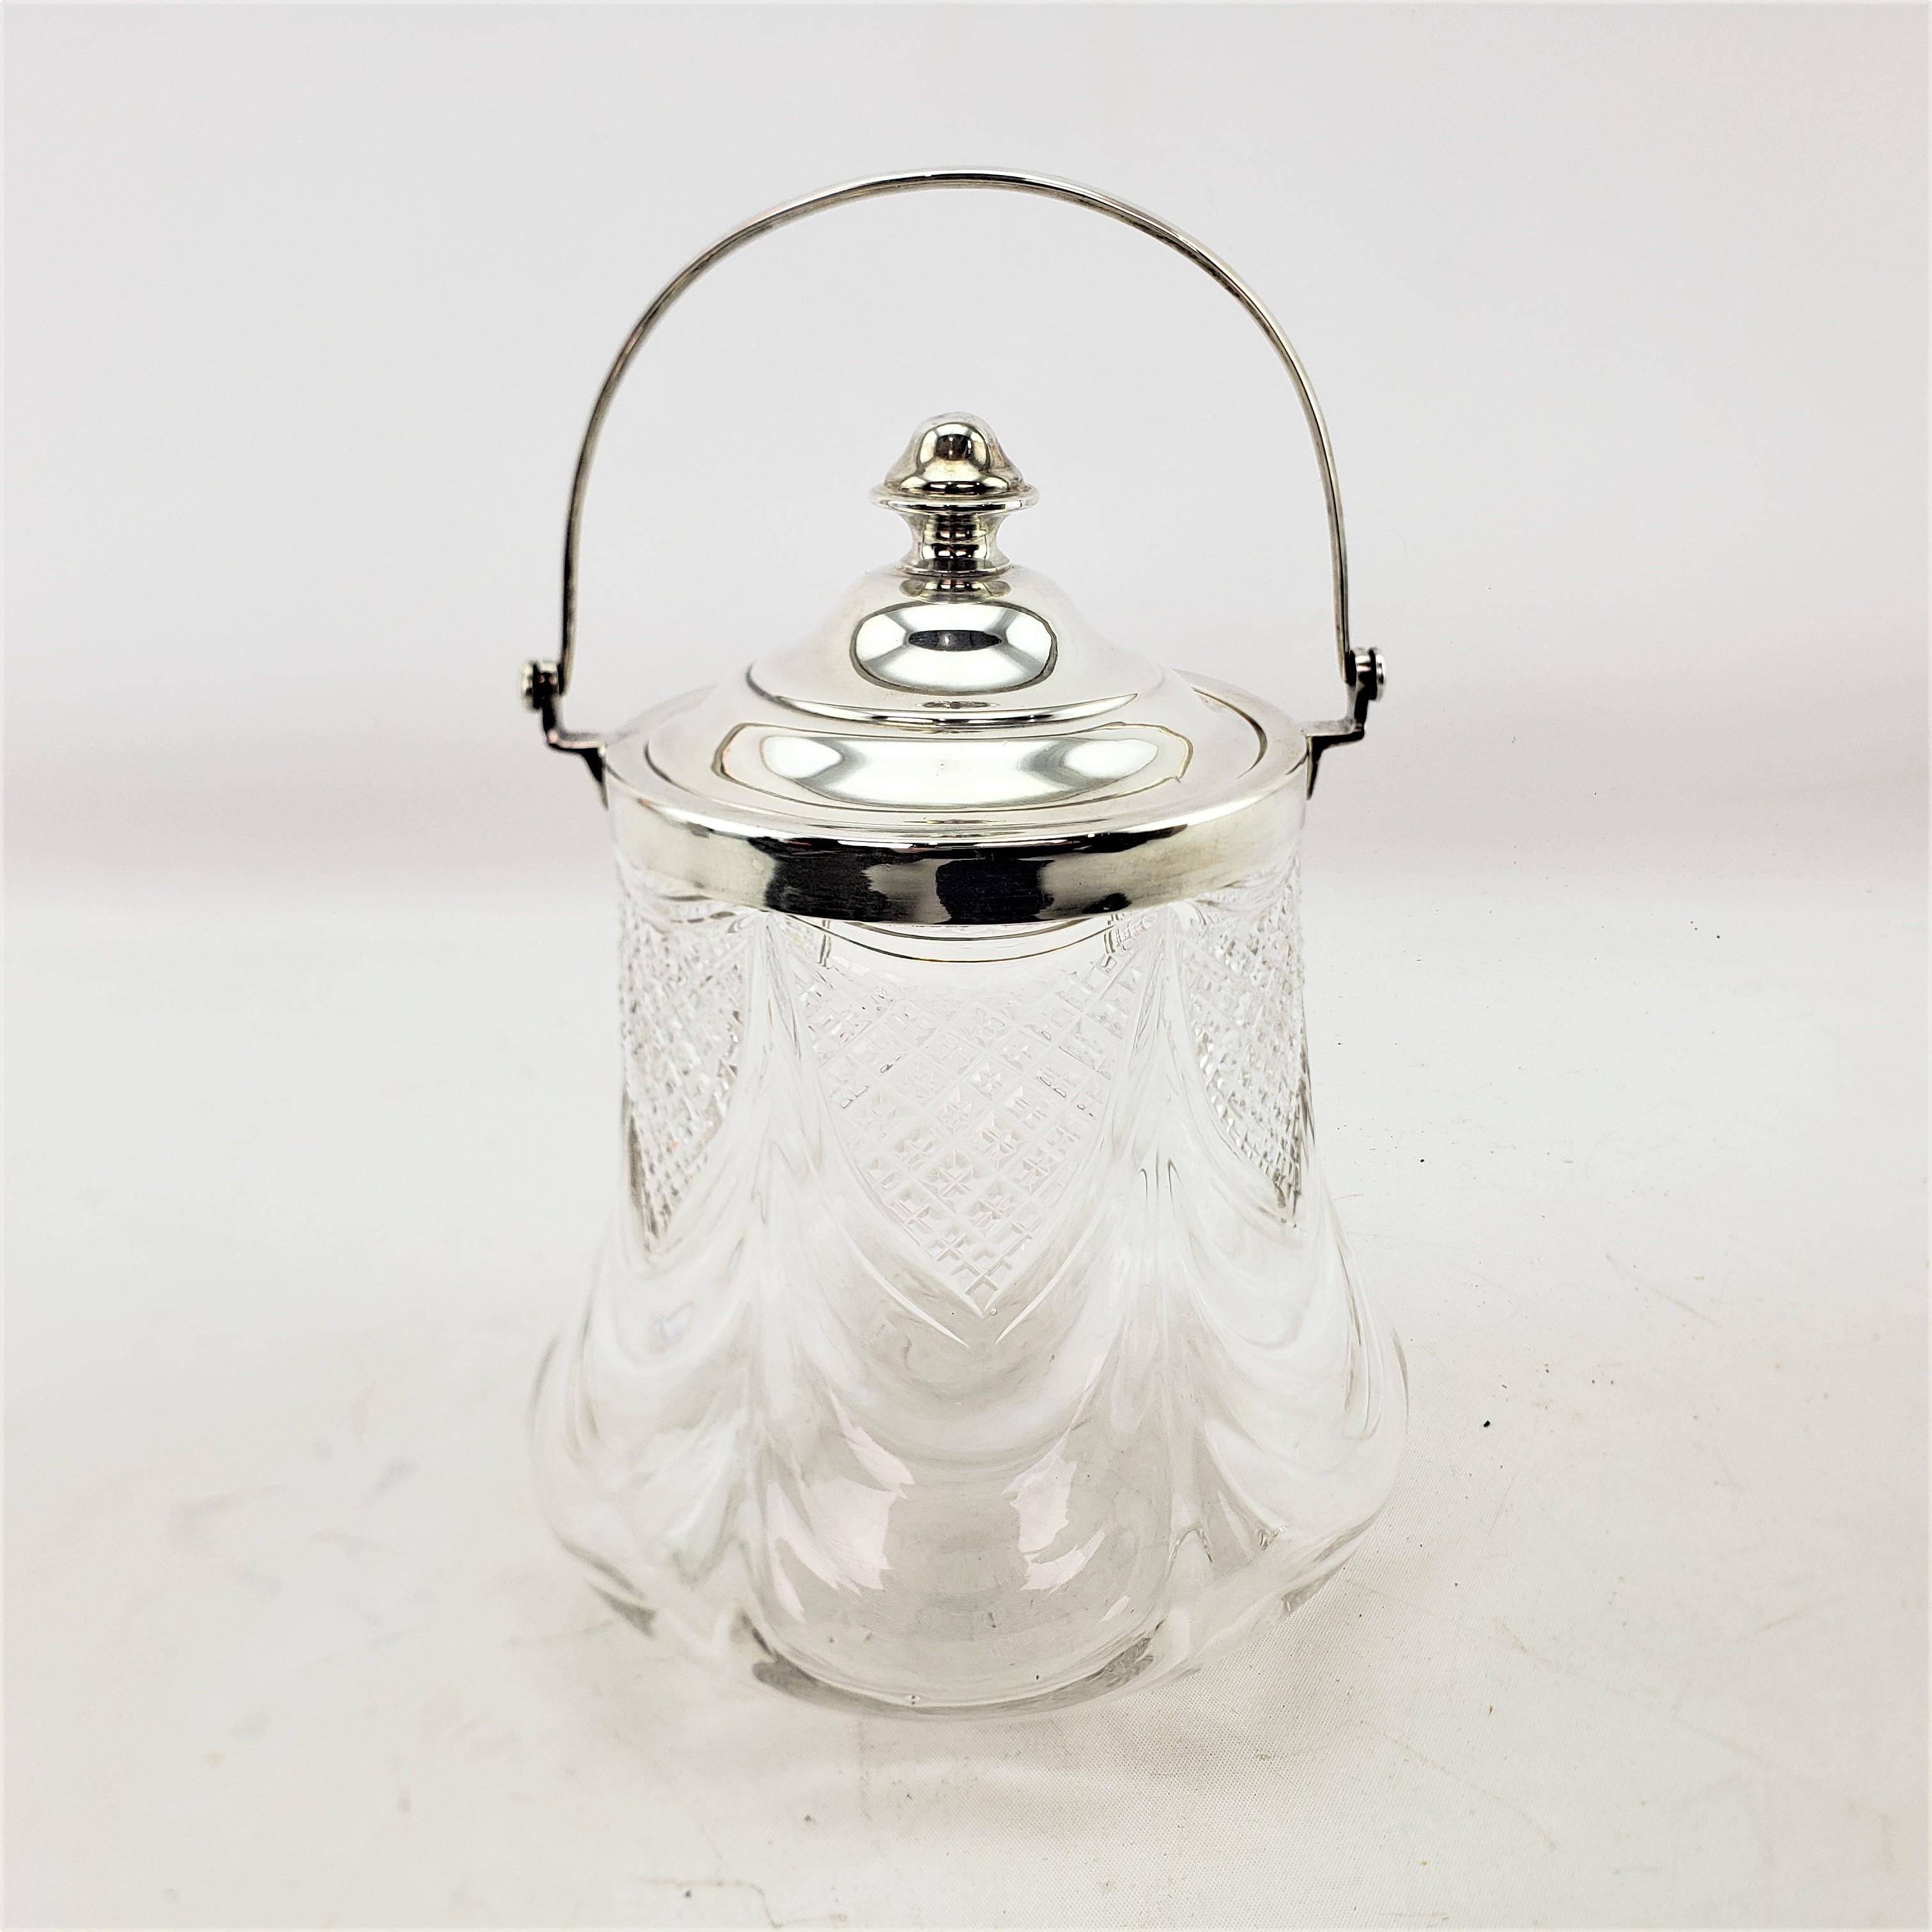 Antique English Crystal & Sterling Silver Biscuit Barrel or Covered Jar In Good Condition For Sale In Hamilton, Ontario